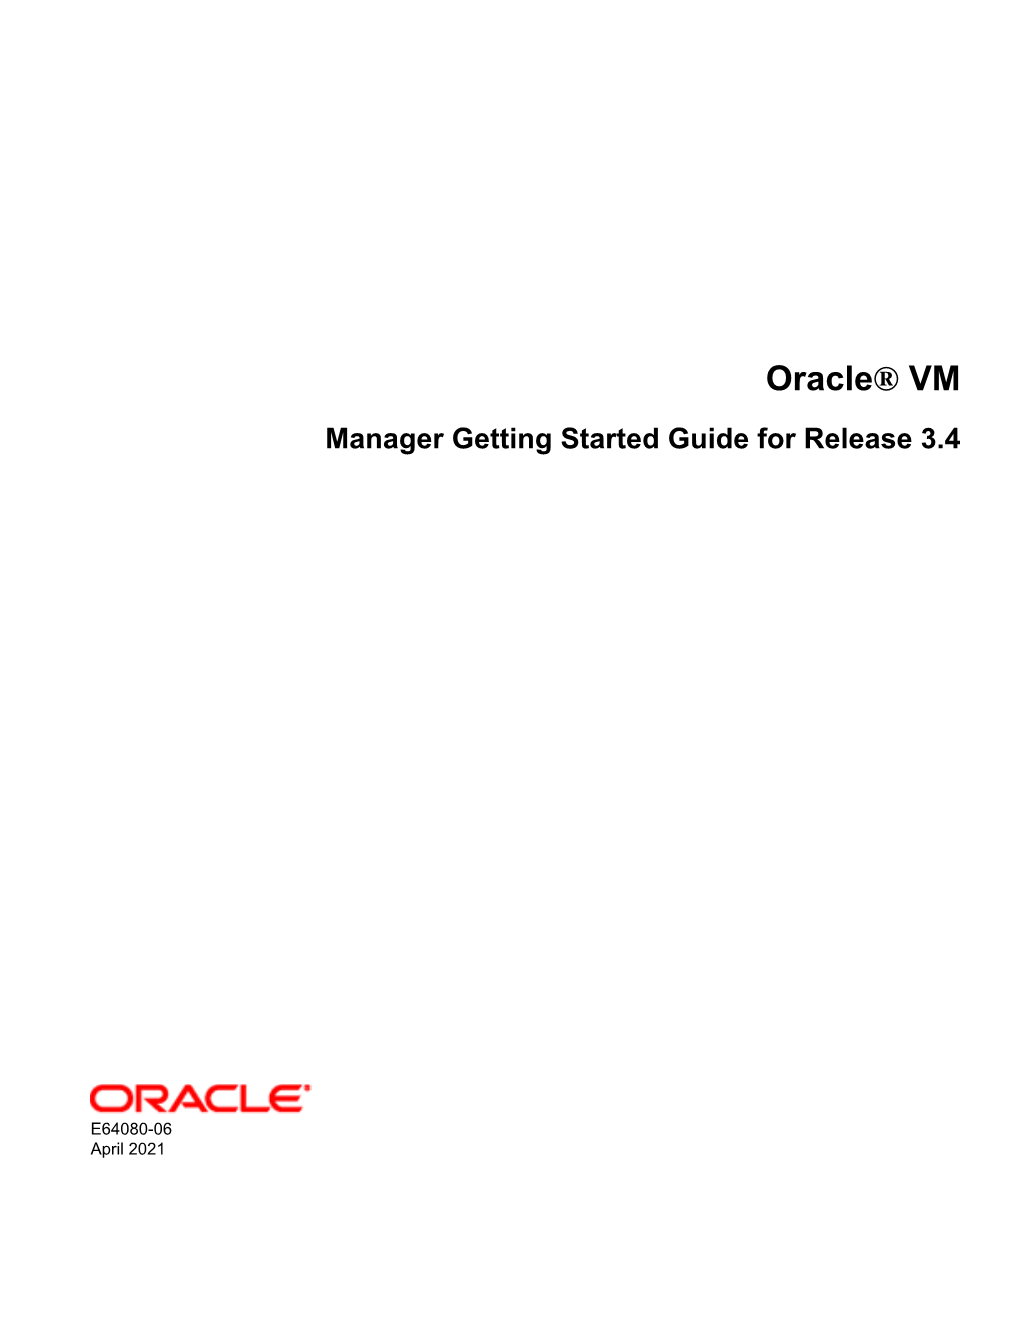 Oracle® VM Manager Getting Started Guide for Release 3.4